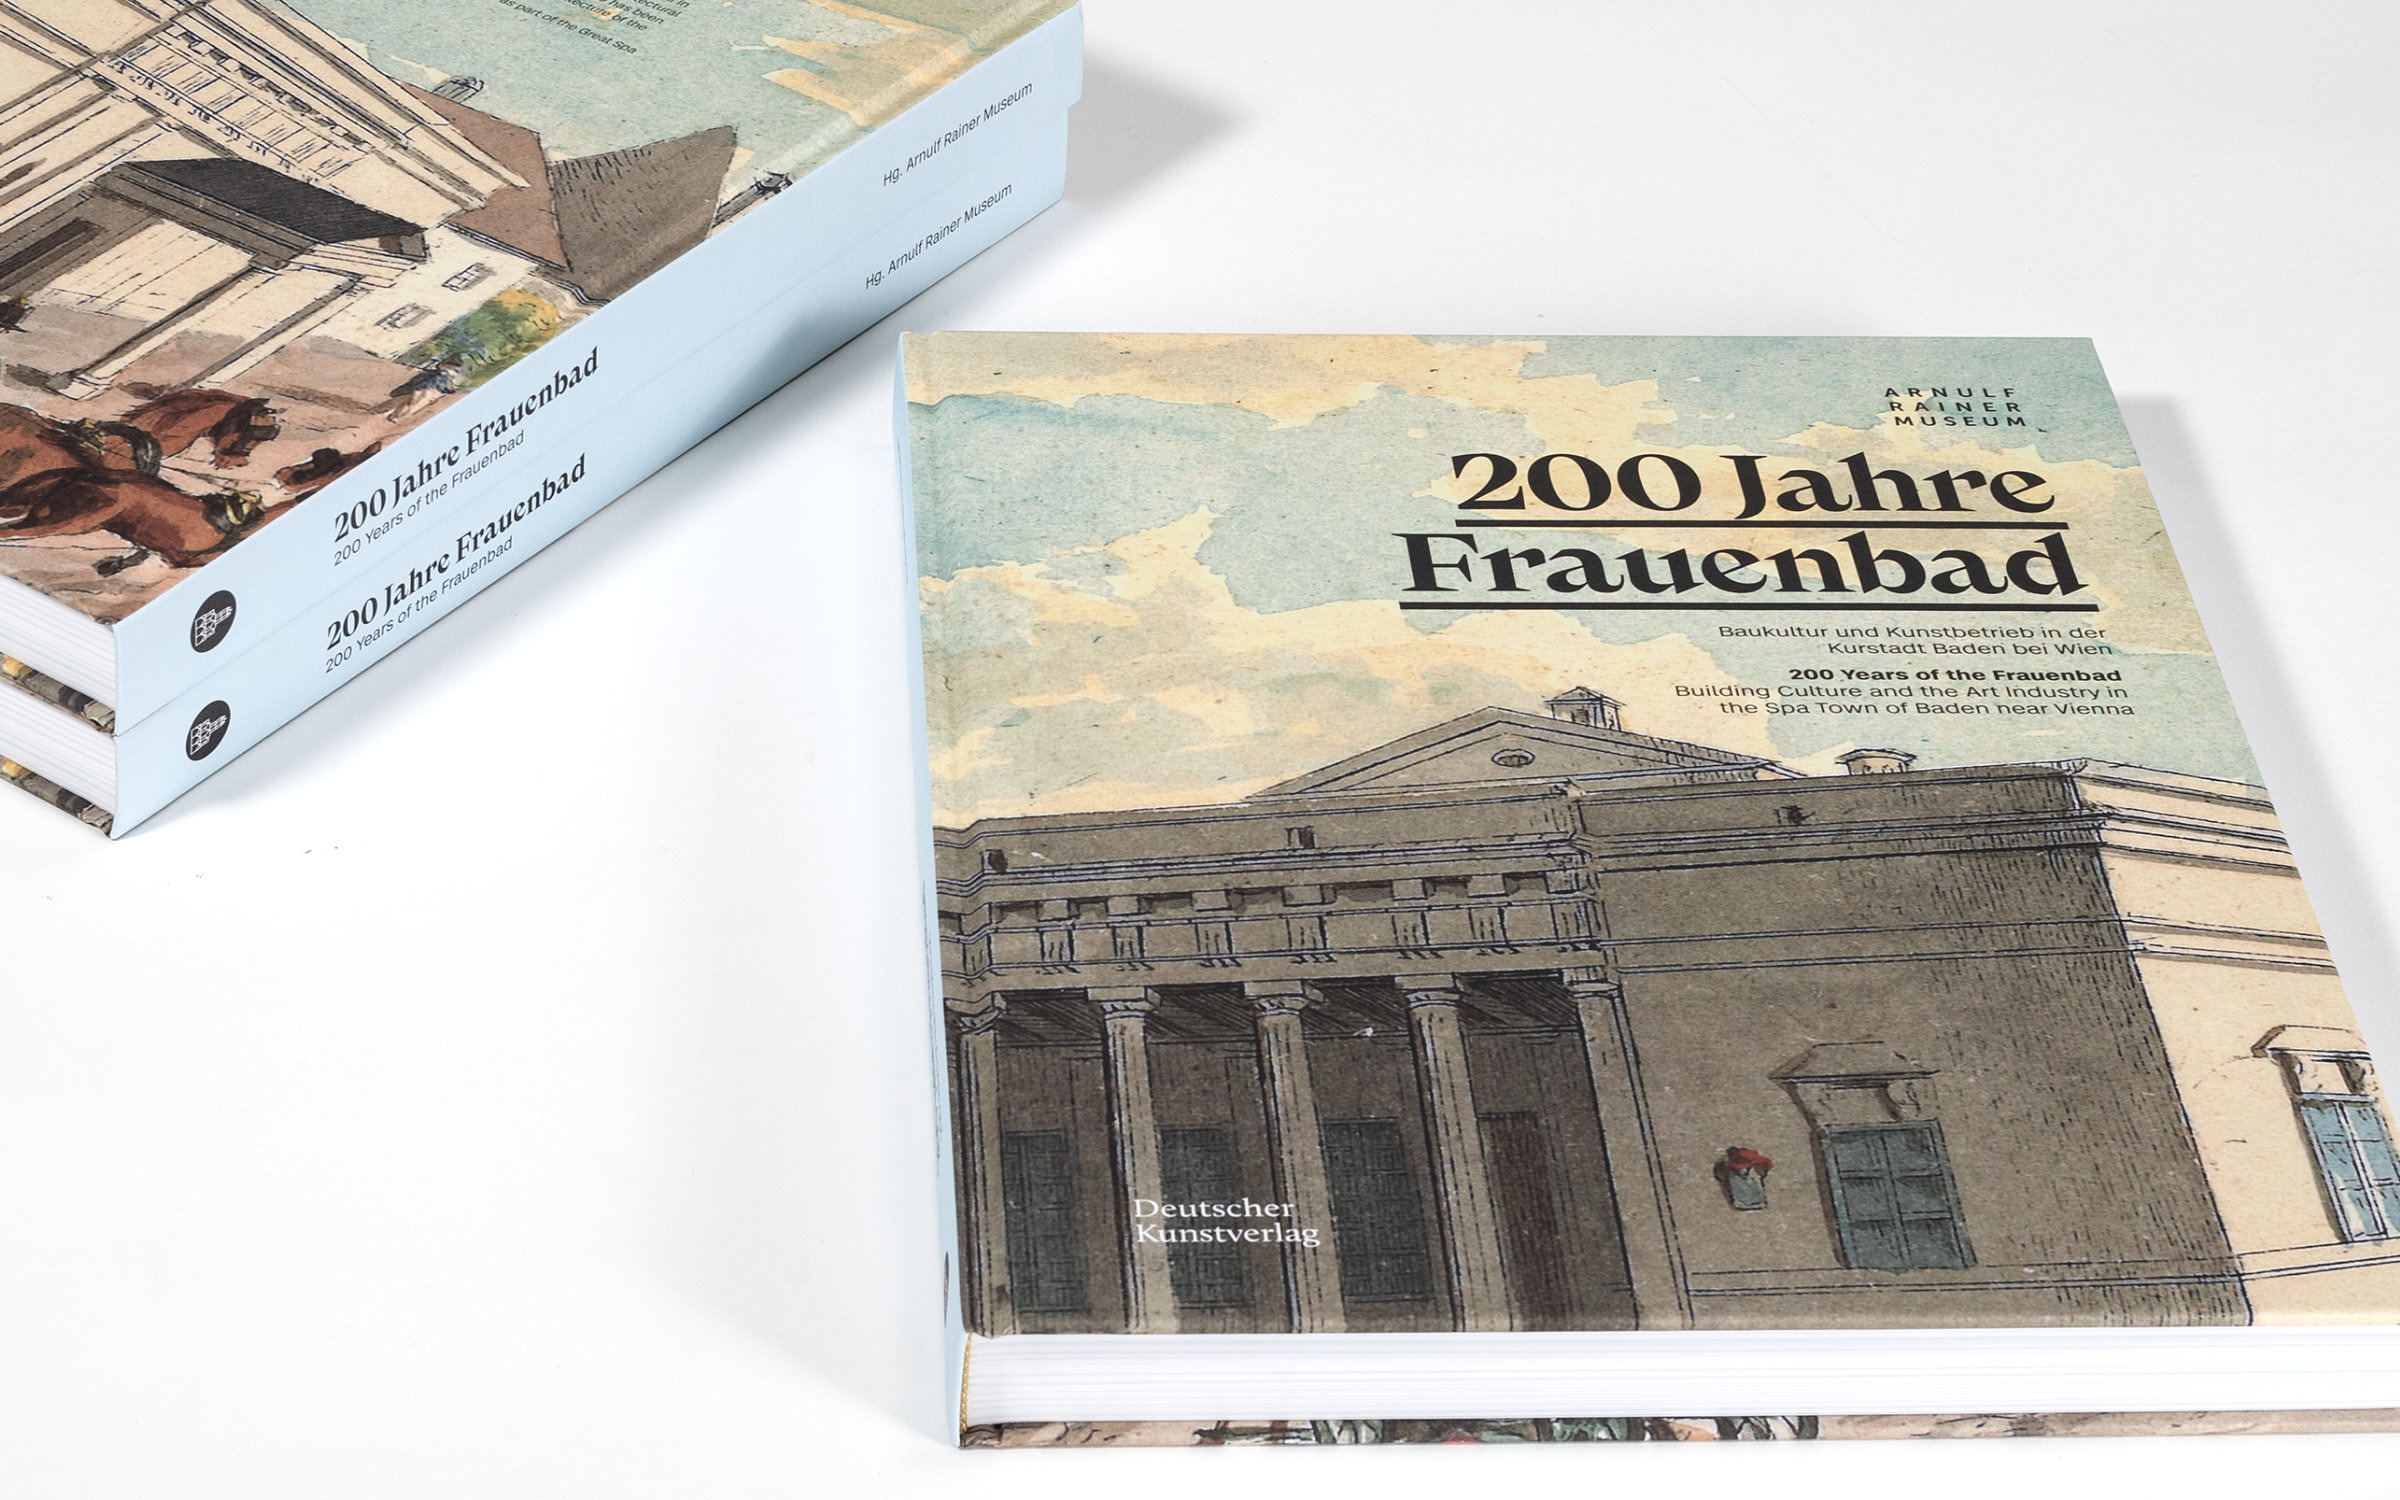 224-page catalog “200 Years of the Frauenbad – Building Culture and the Art industry in the Spa Town of Baden near Vienna”